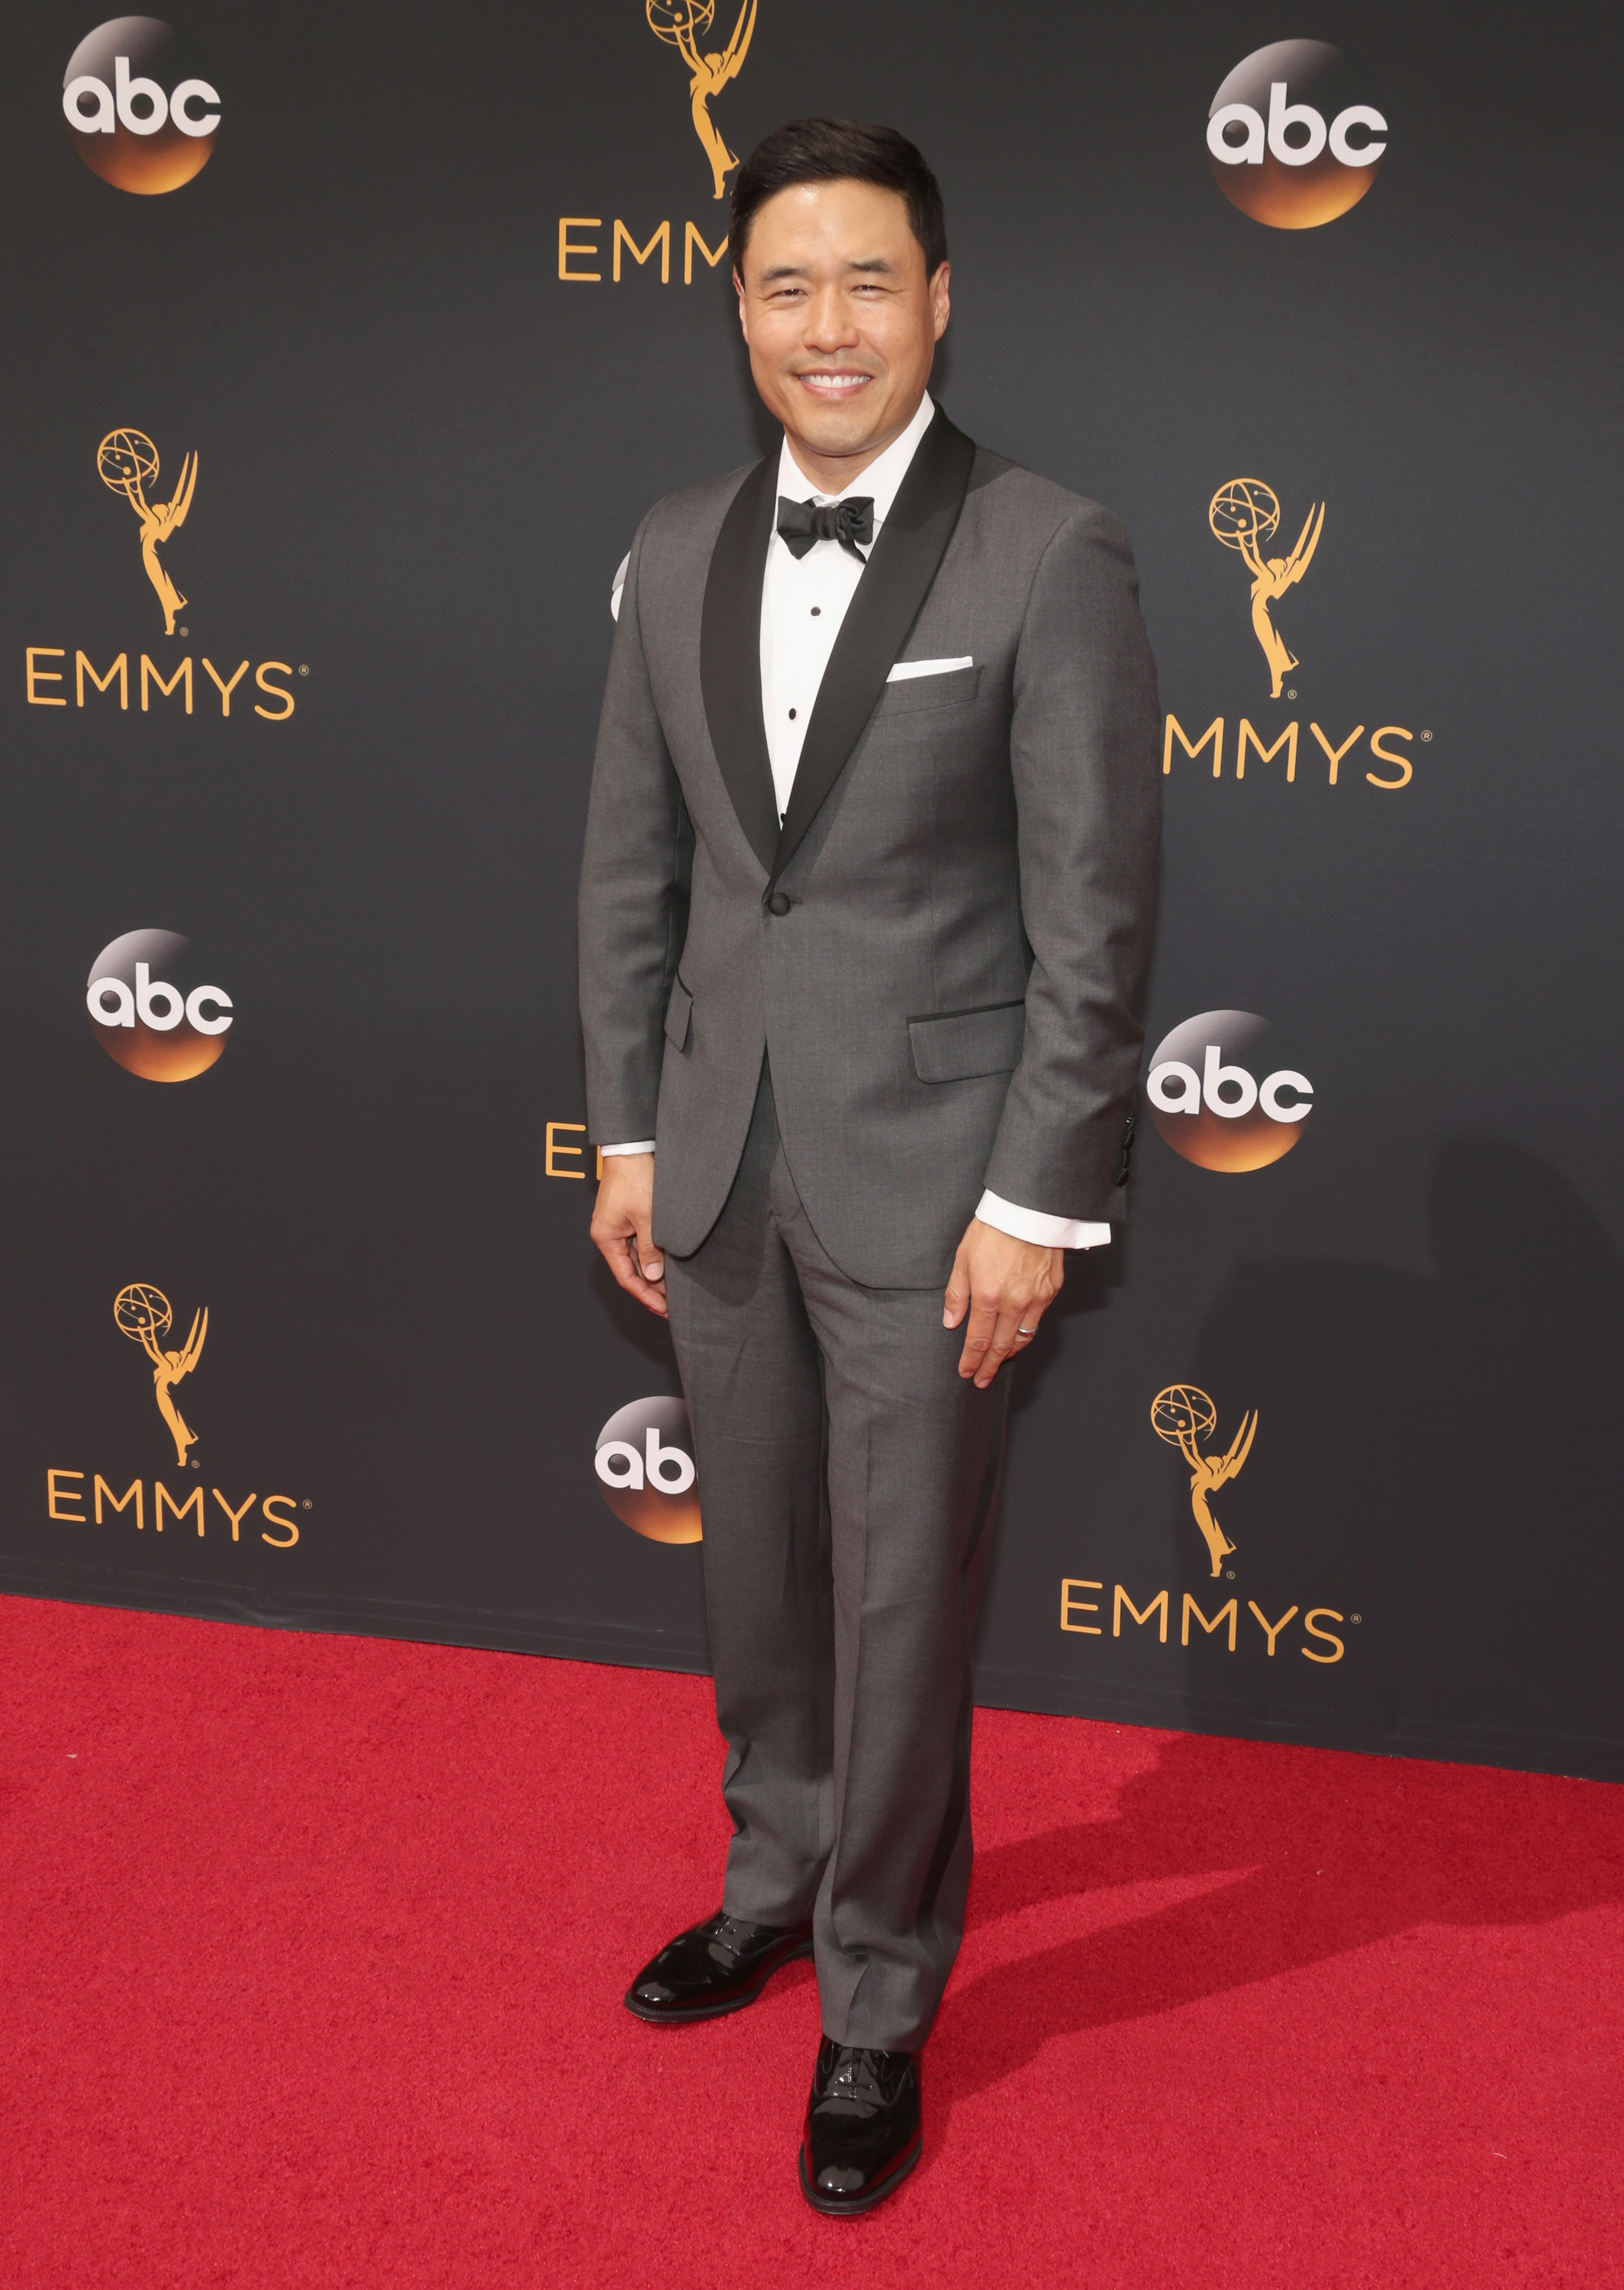 Randall Park arrives at the 68th Annual Primetime Emmy Awards at Microsoft Theater on Sept. 18, 2016 in Los Angeles.